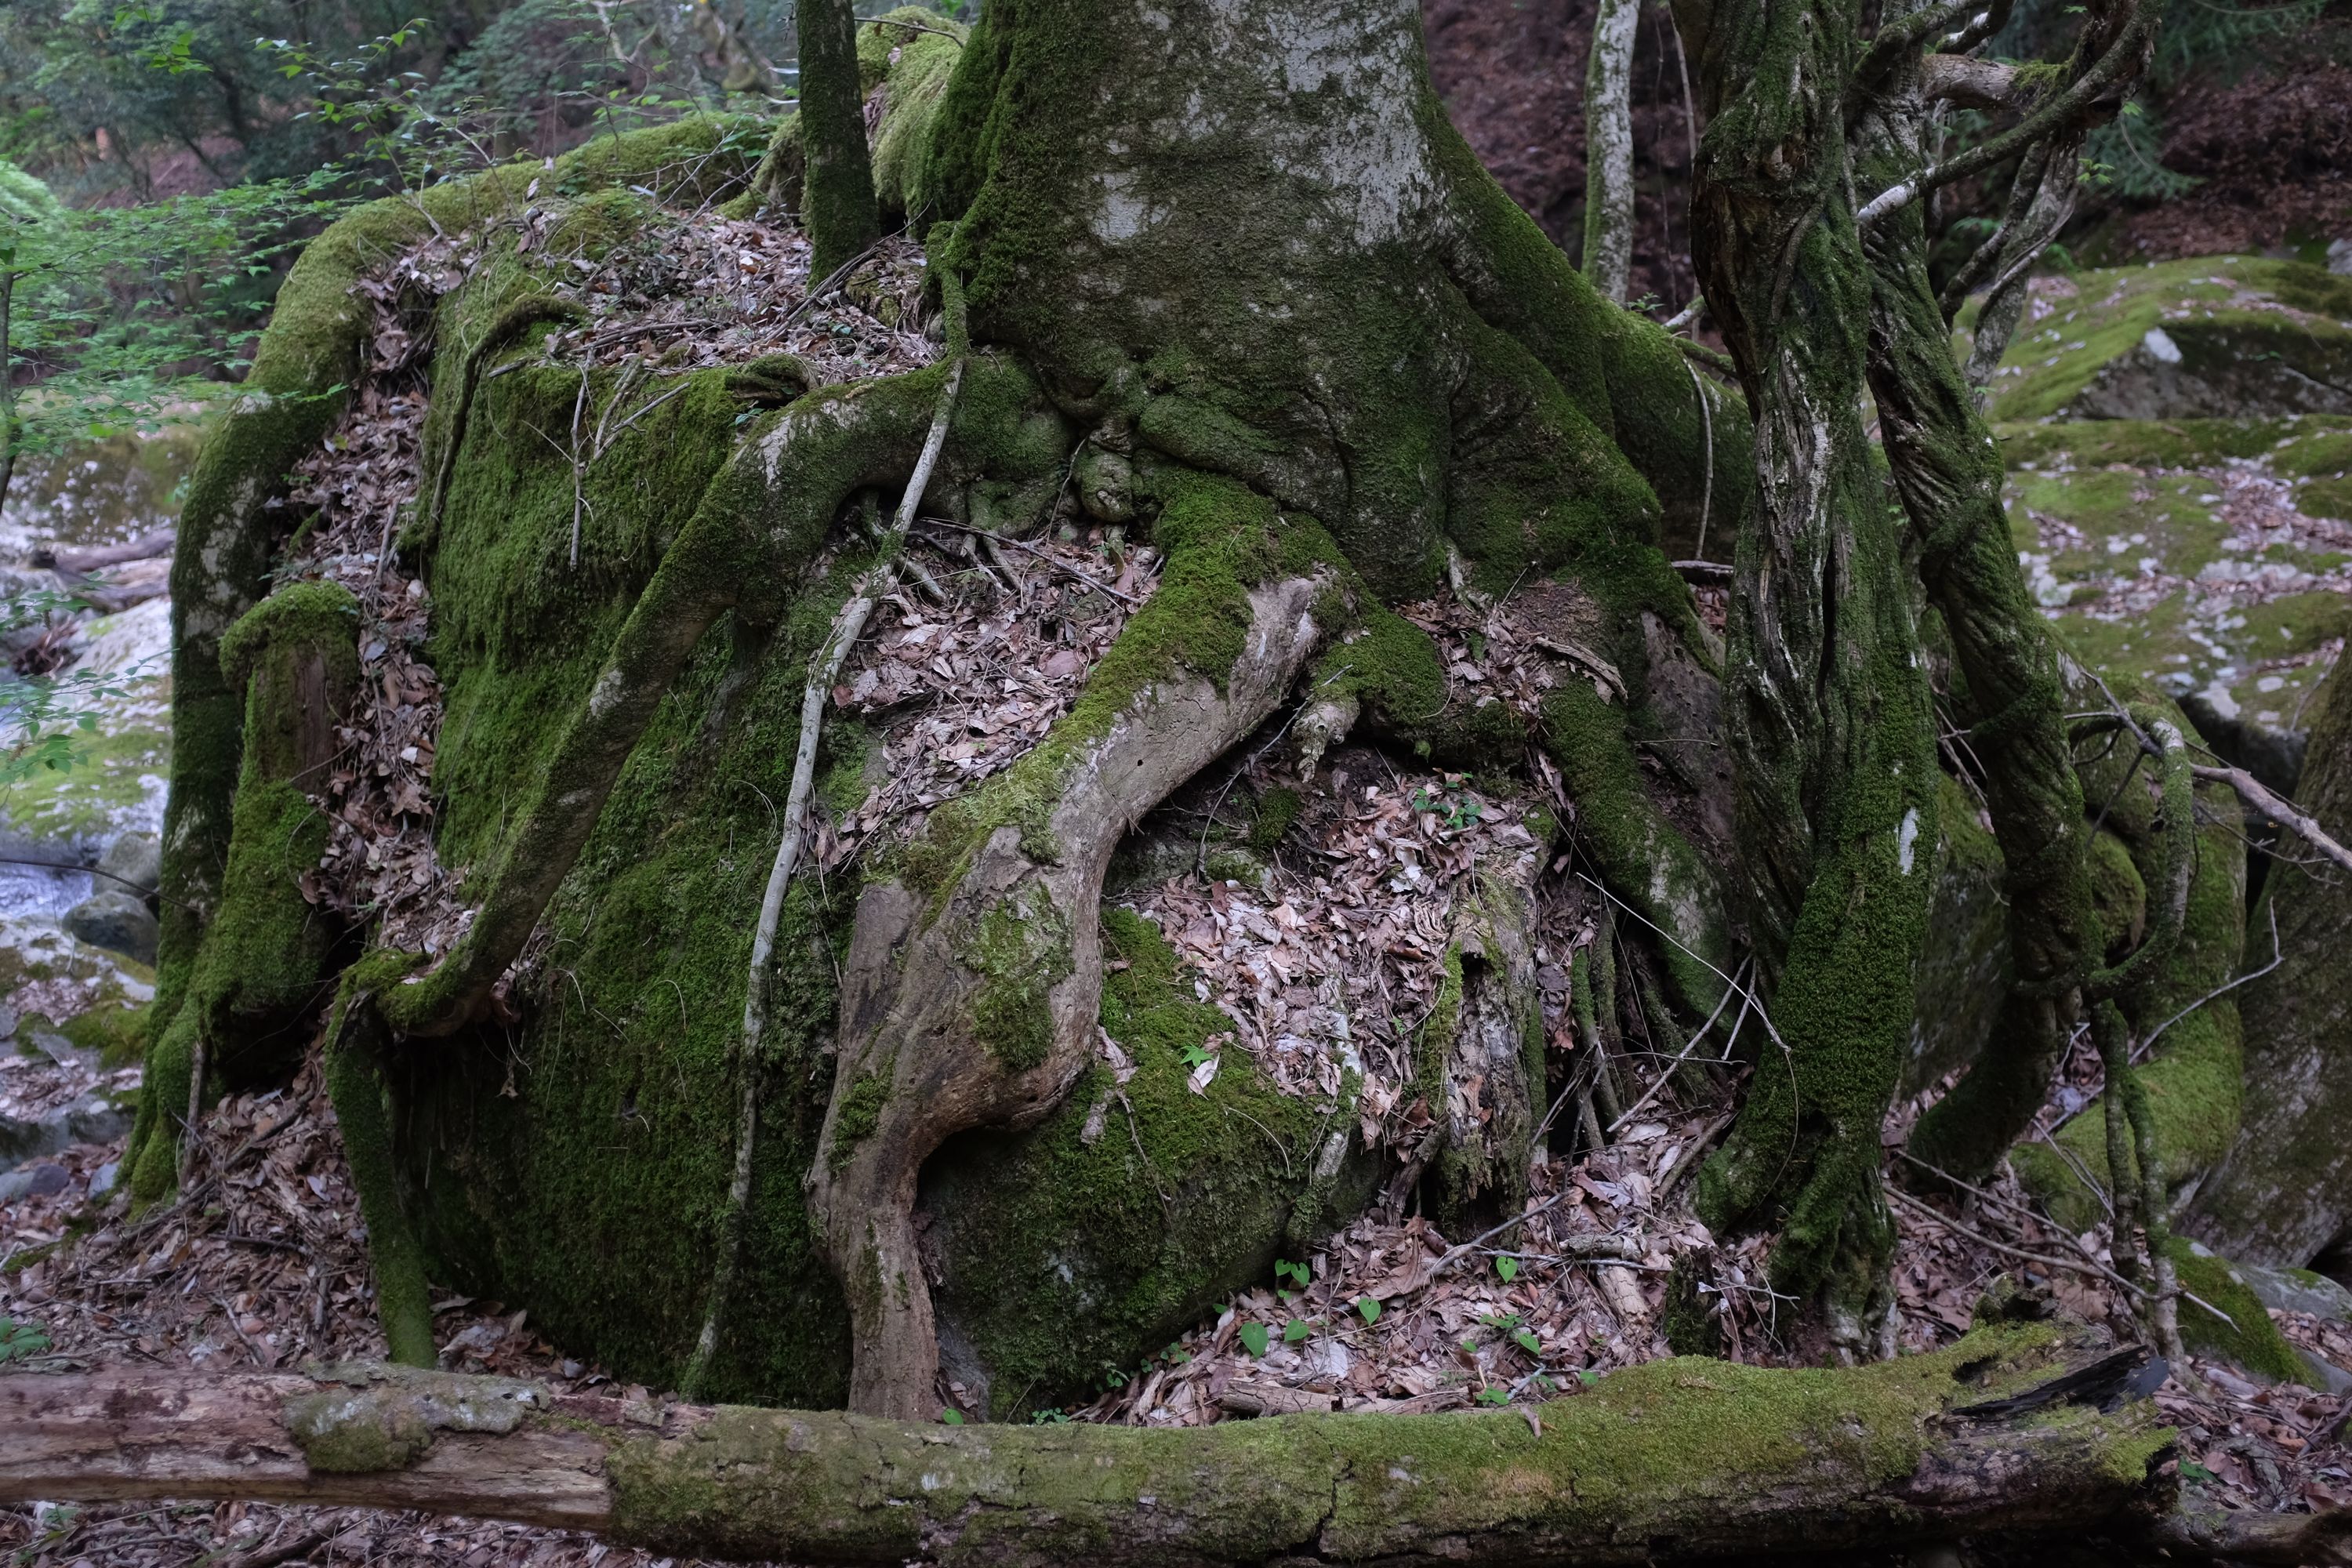 The roots of a tree hug a boulder.